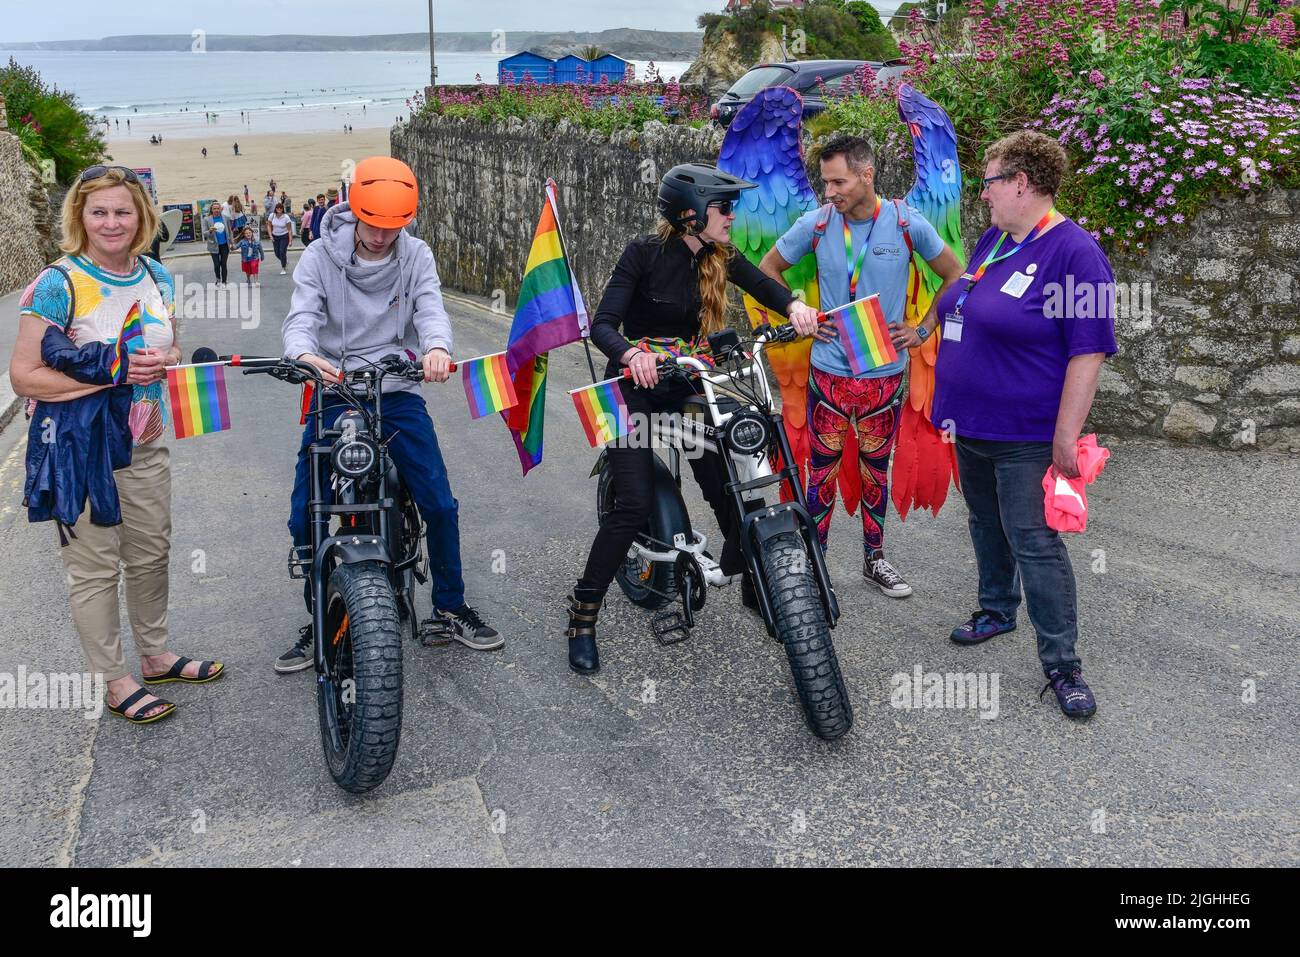 The riders using electric Super 73 bicycles at the start of the vibrant colourful Cornwall Prides Pride parade in Newquay Town centre in the UK. Stock Photo